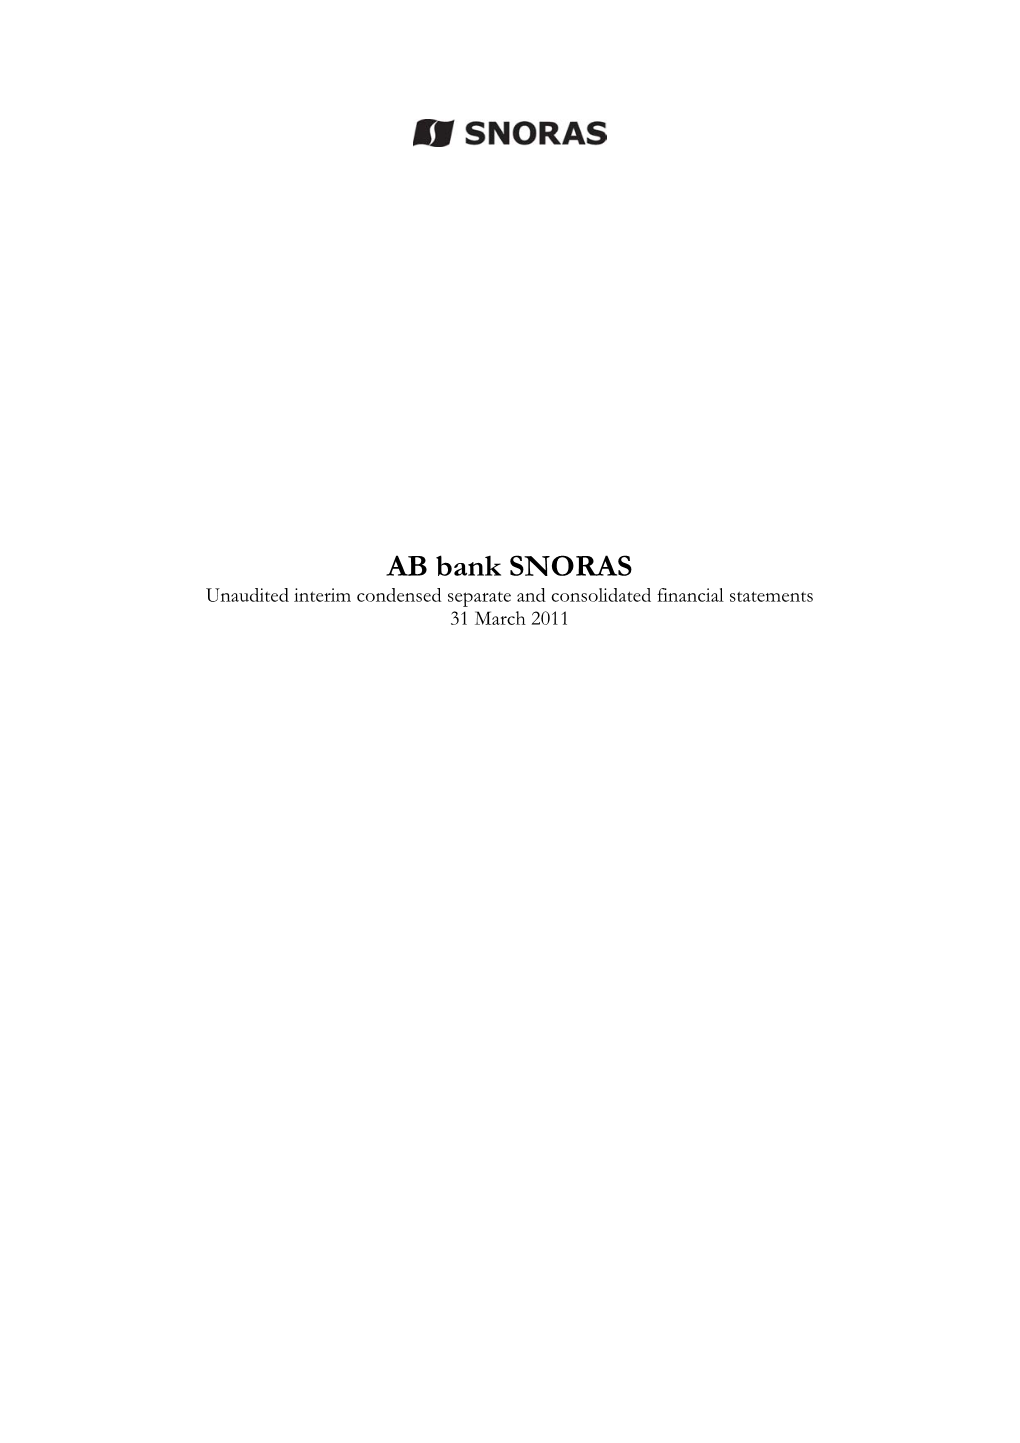 AB Bank SNORAS Unaudited Interim Condensed Separate and Consolidated Financial Statements 31 March 2011